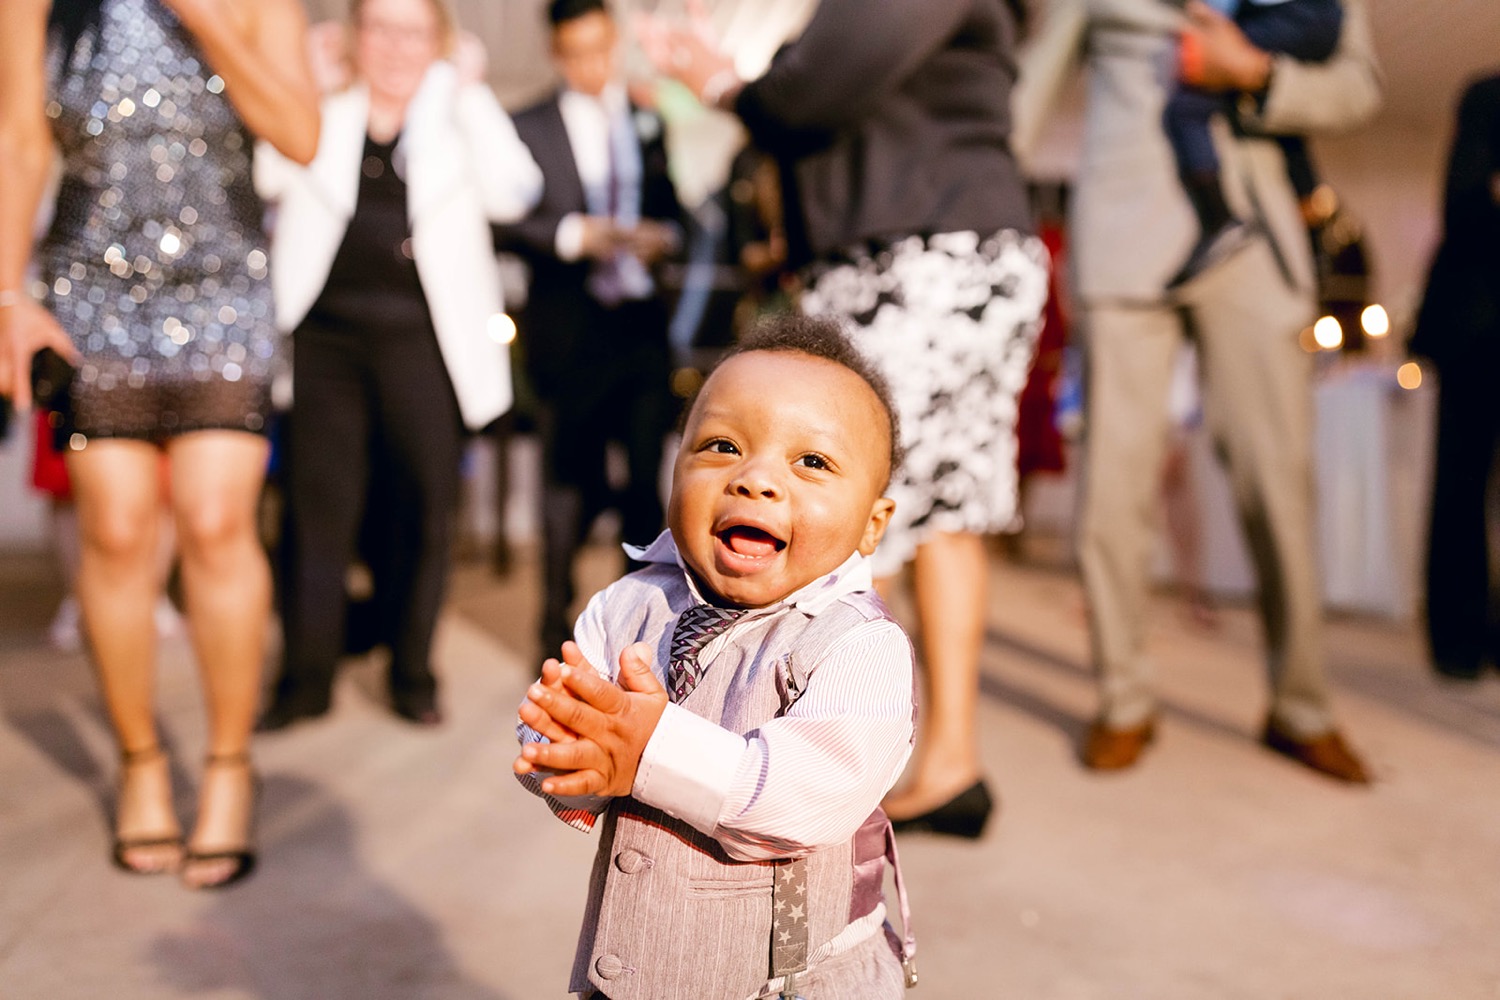 baby clapping dancing wedding reception